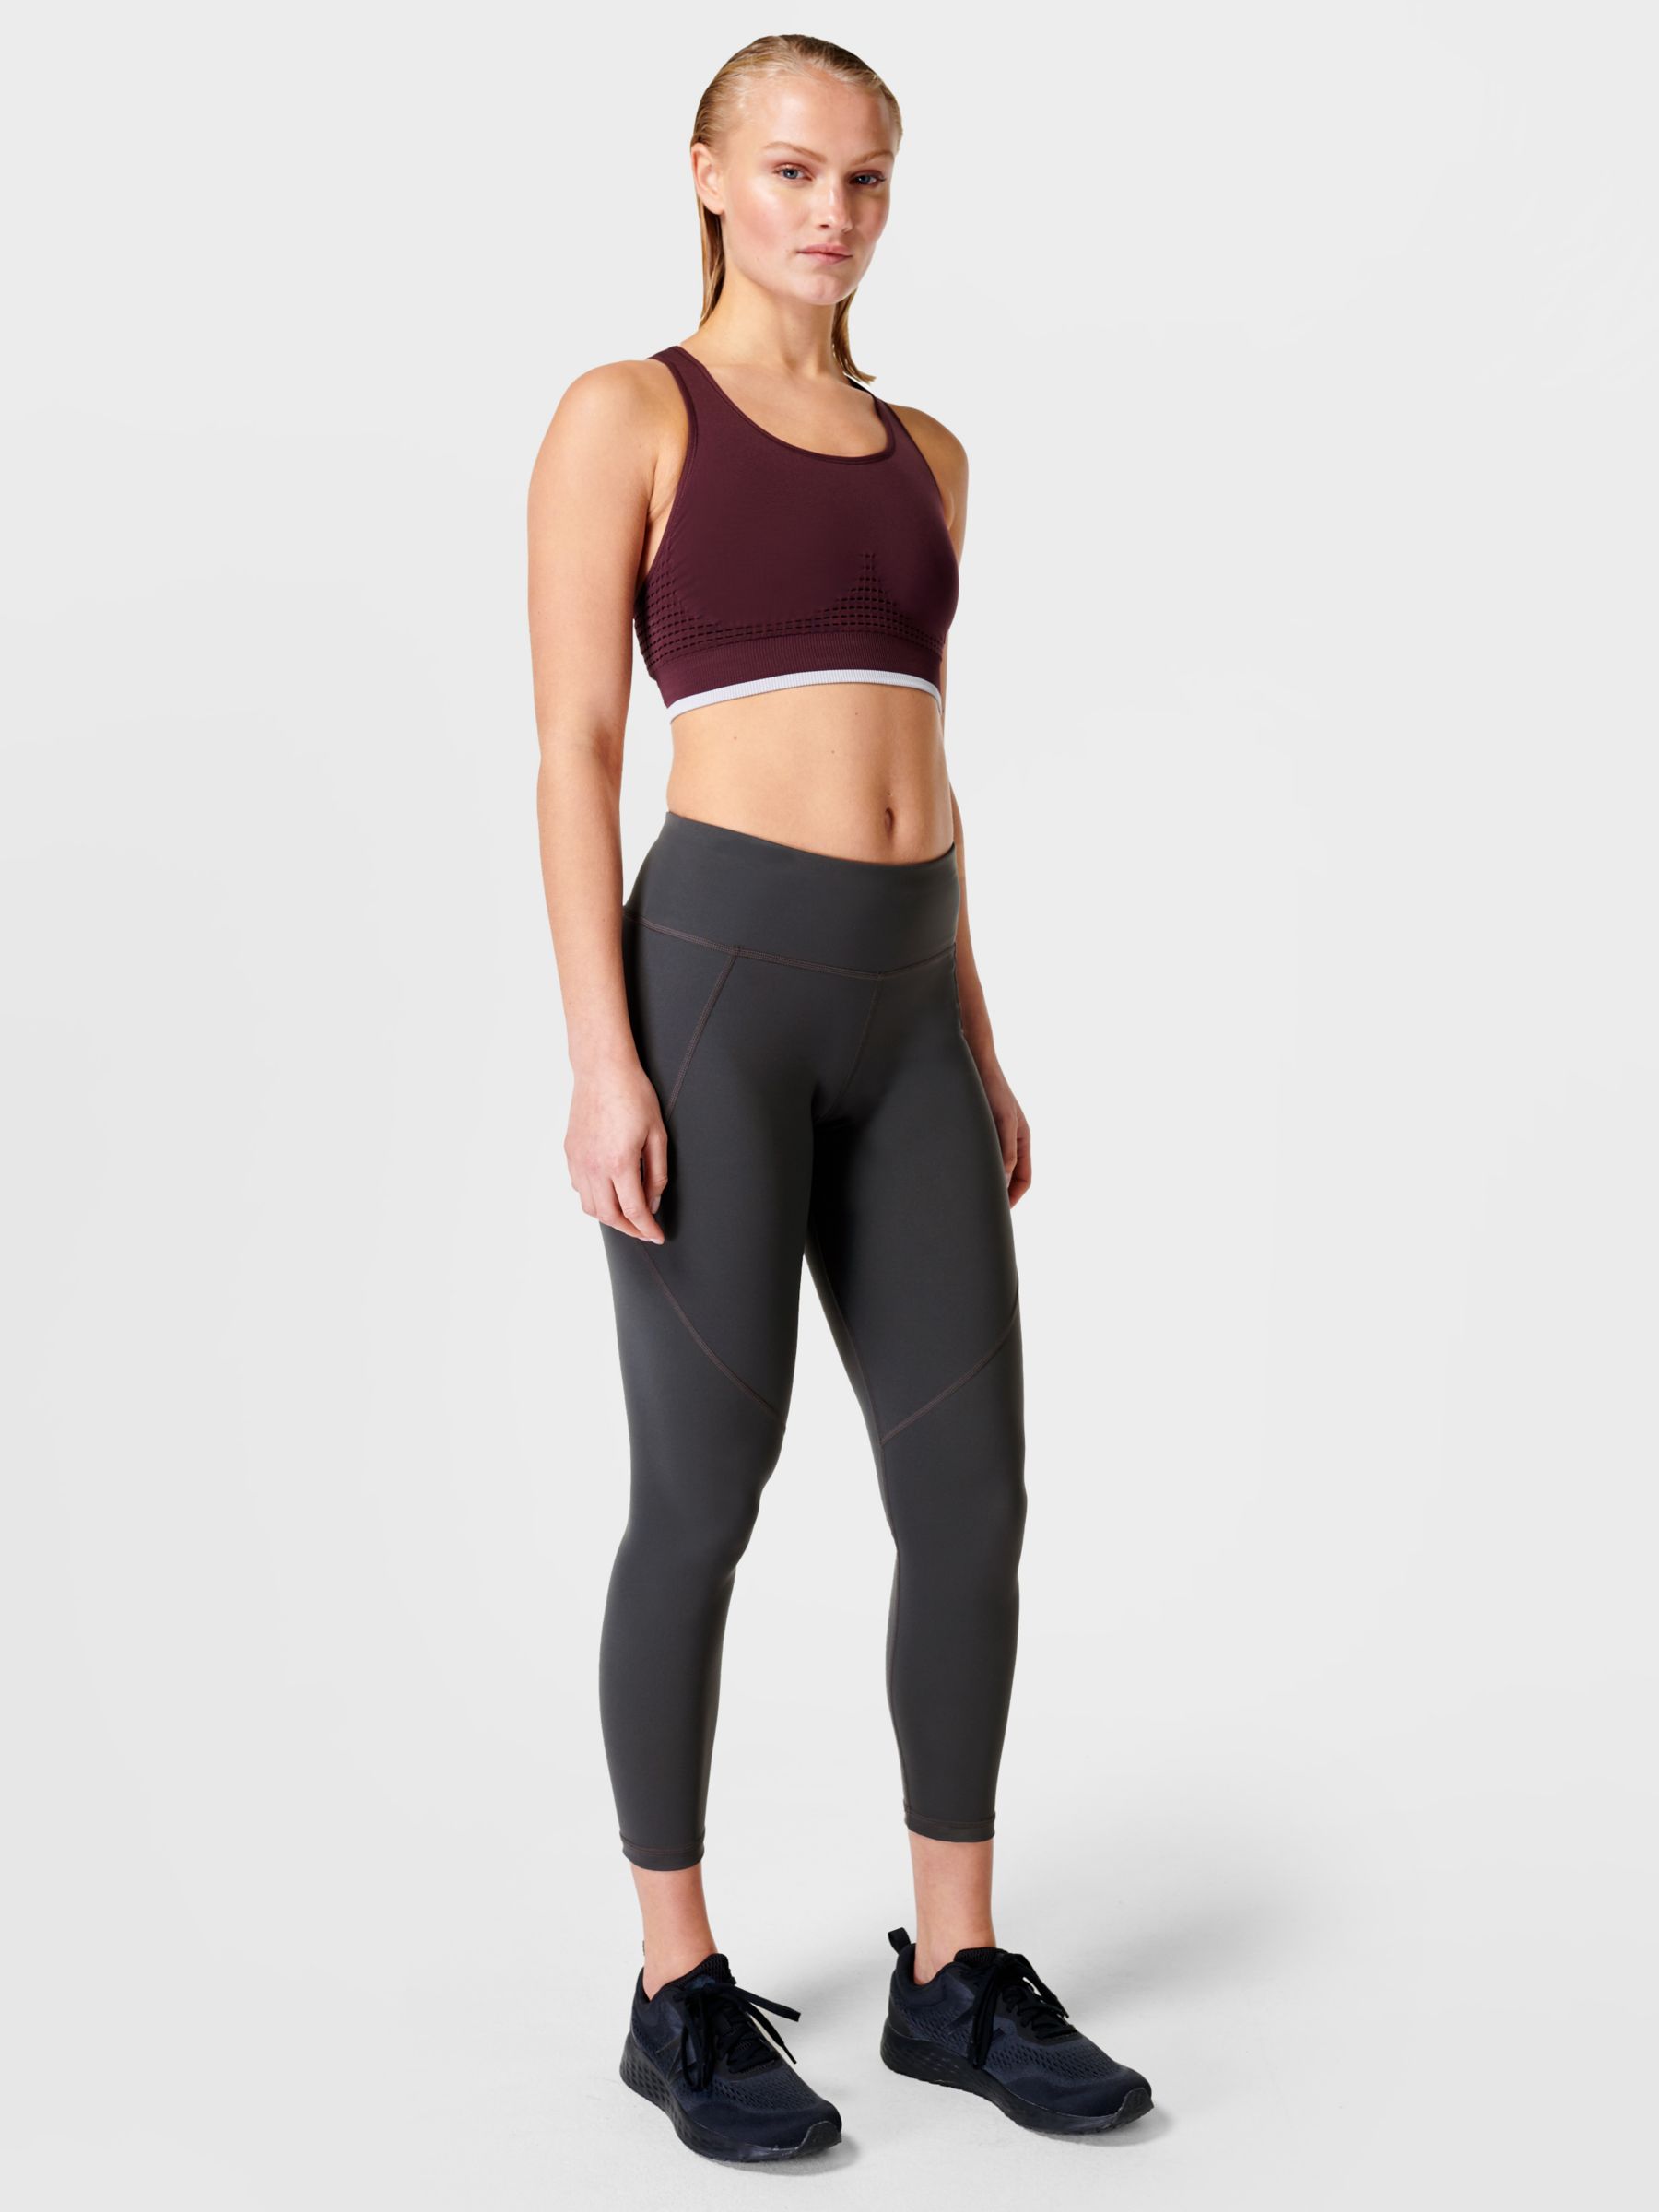 Sweaty Betty Zero Gravity 7/8 Run Leggings, 7 Seriously Comfortable  Leggings You Need to Try — From 1 Cool Activewear Brand